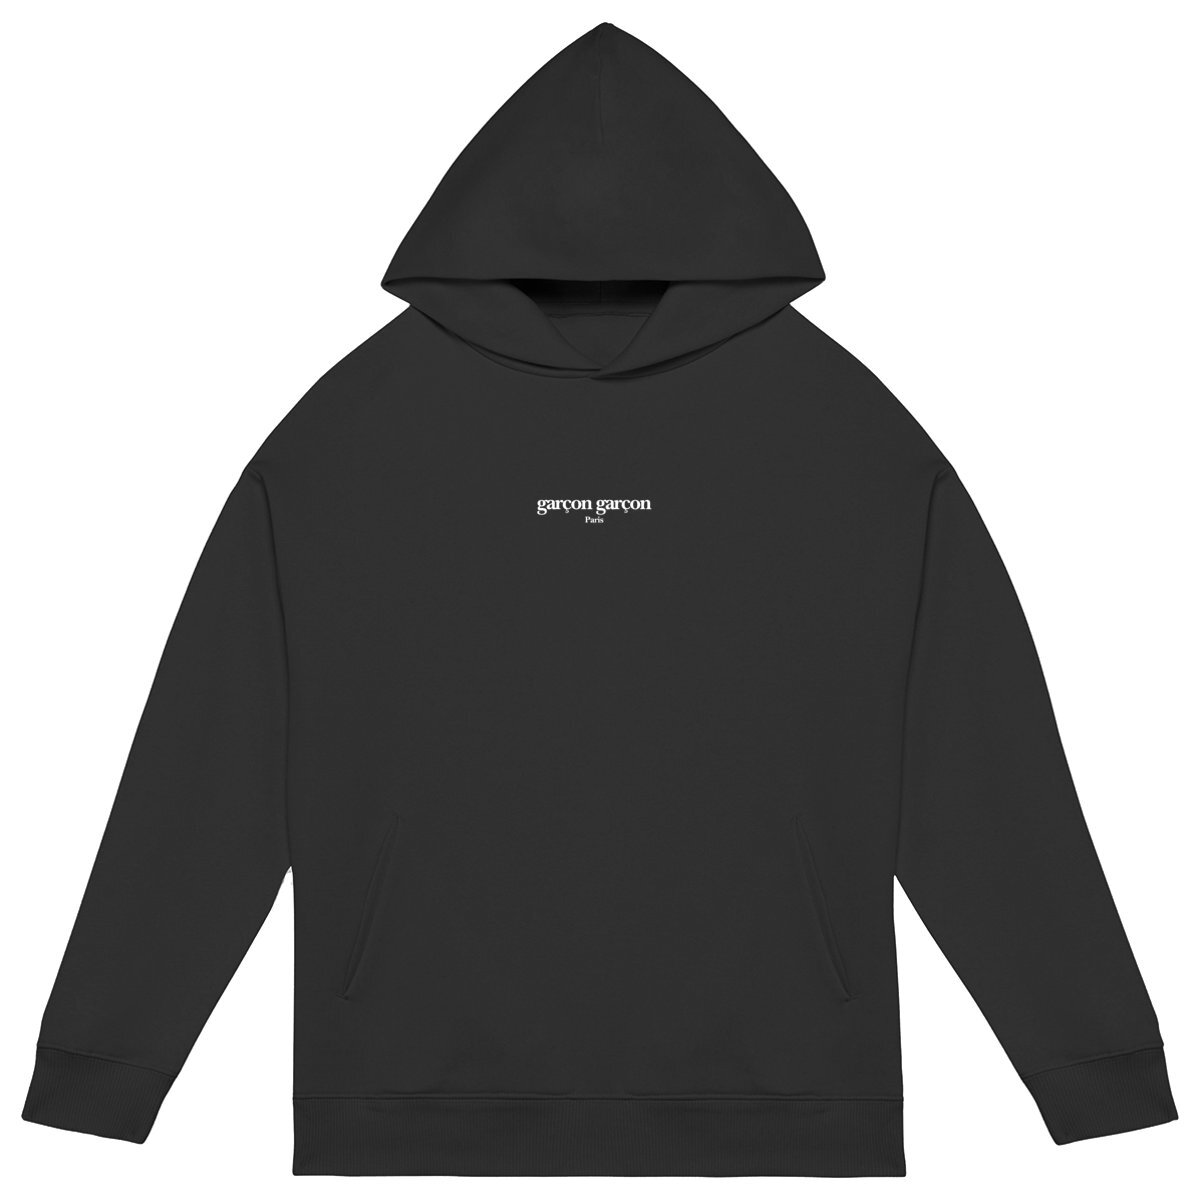 garçon garçon essentiel black oversized hoodie. Sleek in black and whispering Parisian chic, this hoodie is the sartorial whisper of 'garçon garçon' — a statement of understated elegance. Perfect for those who carry a piece of Paris in their hearts and a touch of audacity on their sleeves.